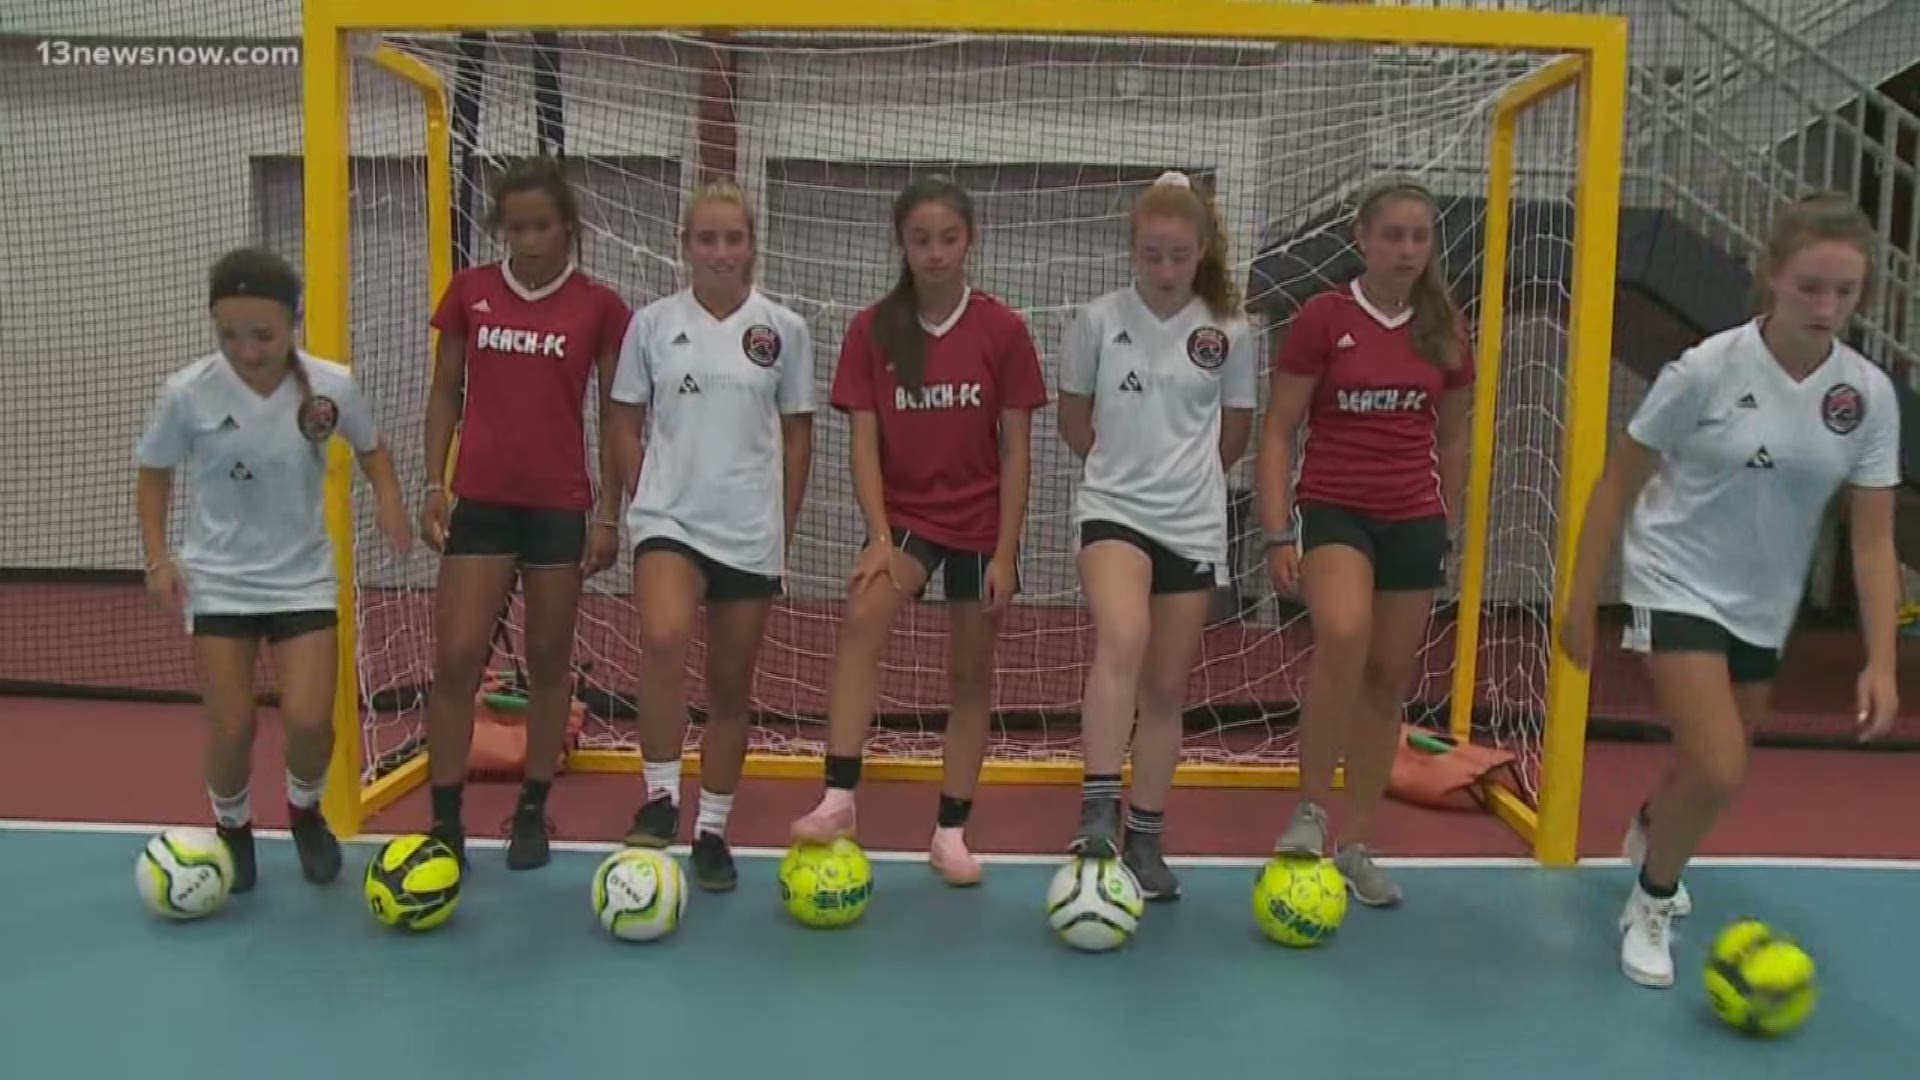 The USA women's national team has inspired young girls with their talent and drive.